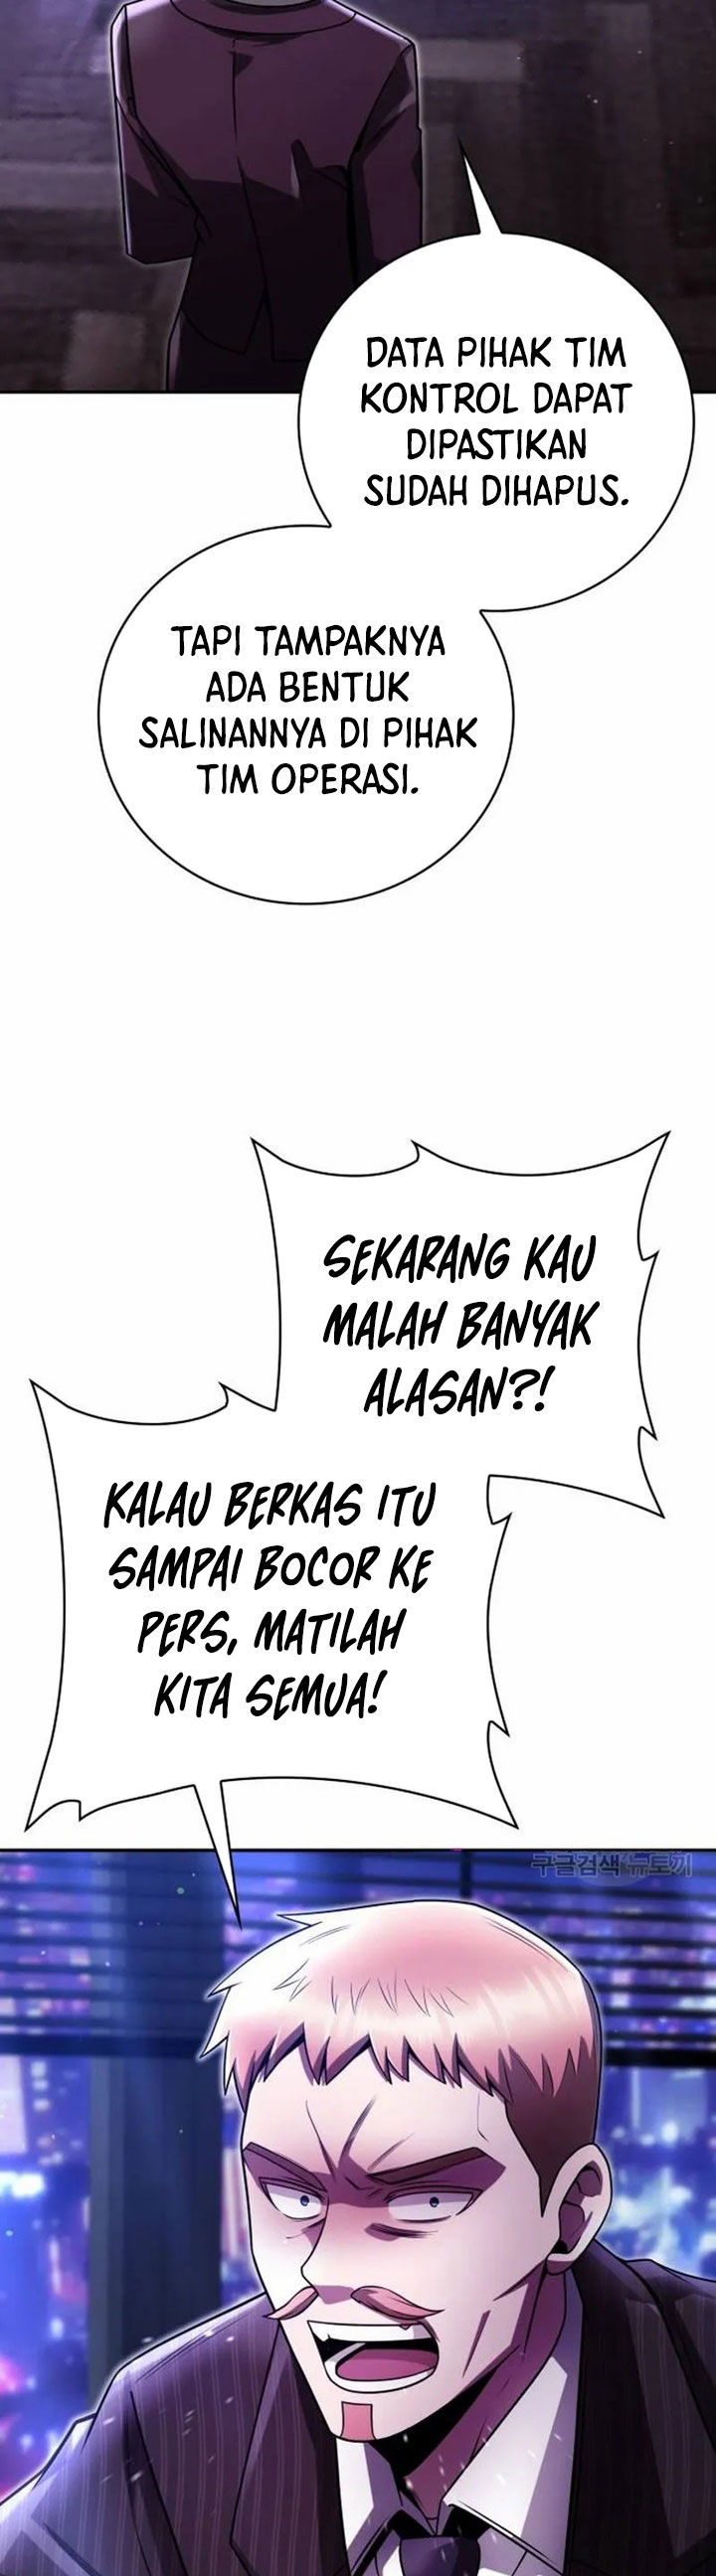 Dilarang COPAS - situs resmi www.mangacanblog.com - Komik clever cleaning life of the returned genius hunter 032 - chapter 32 33 Indonesia clever cleaning life of the returned genius hunter 032 - chapter 32 Terbaru 11|Baca Manga Komik Indonesia|Mangacan